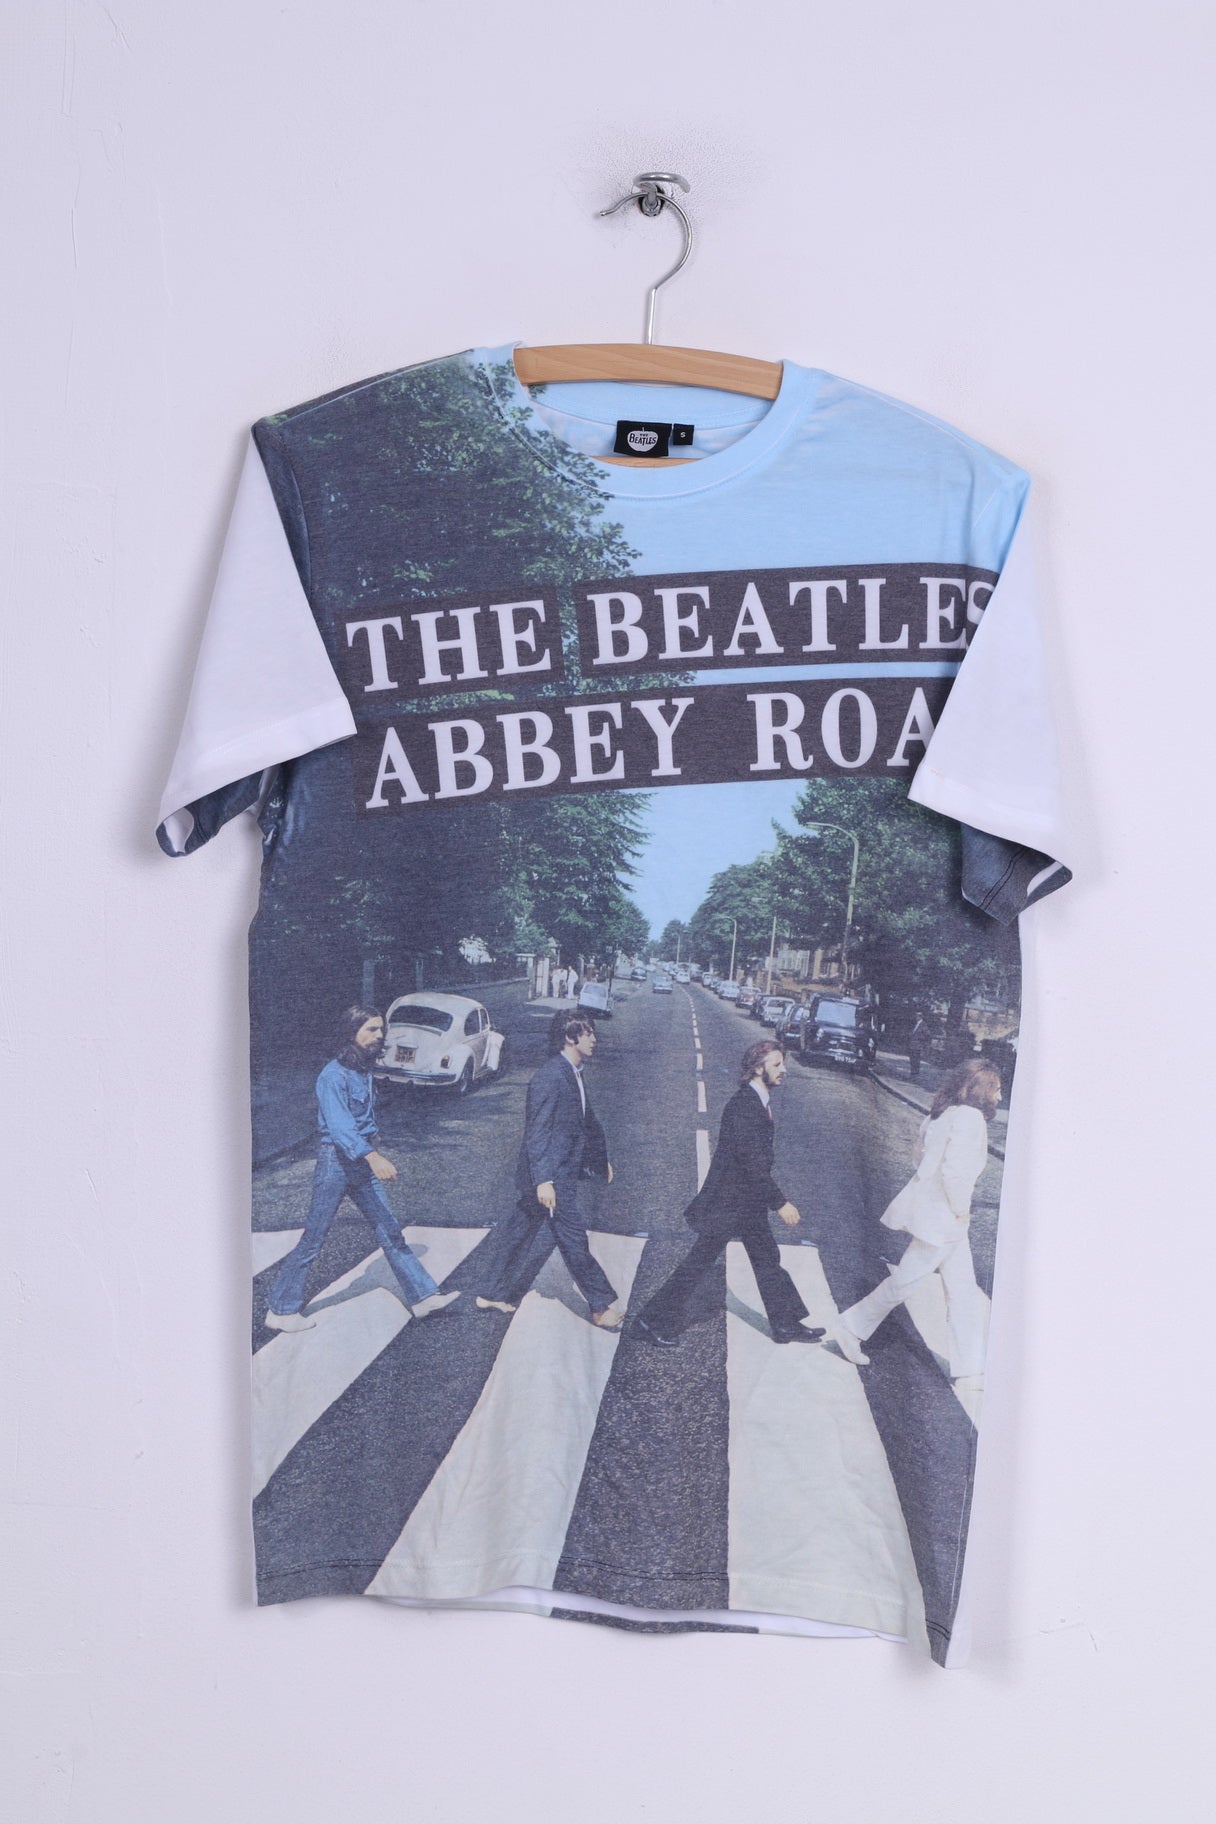 The Beatles Abbey Road Mens S T- Shirt Graphic Cotton Music Band 2015 Apple Corps